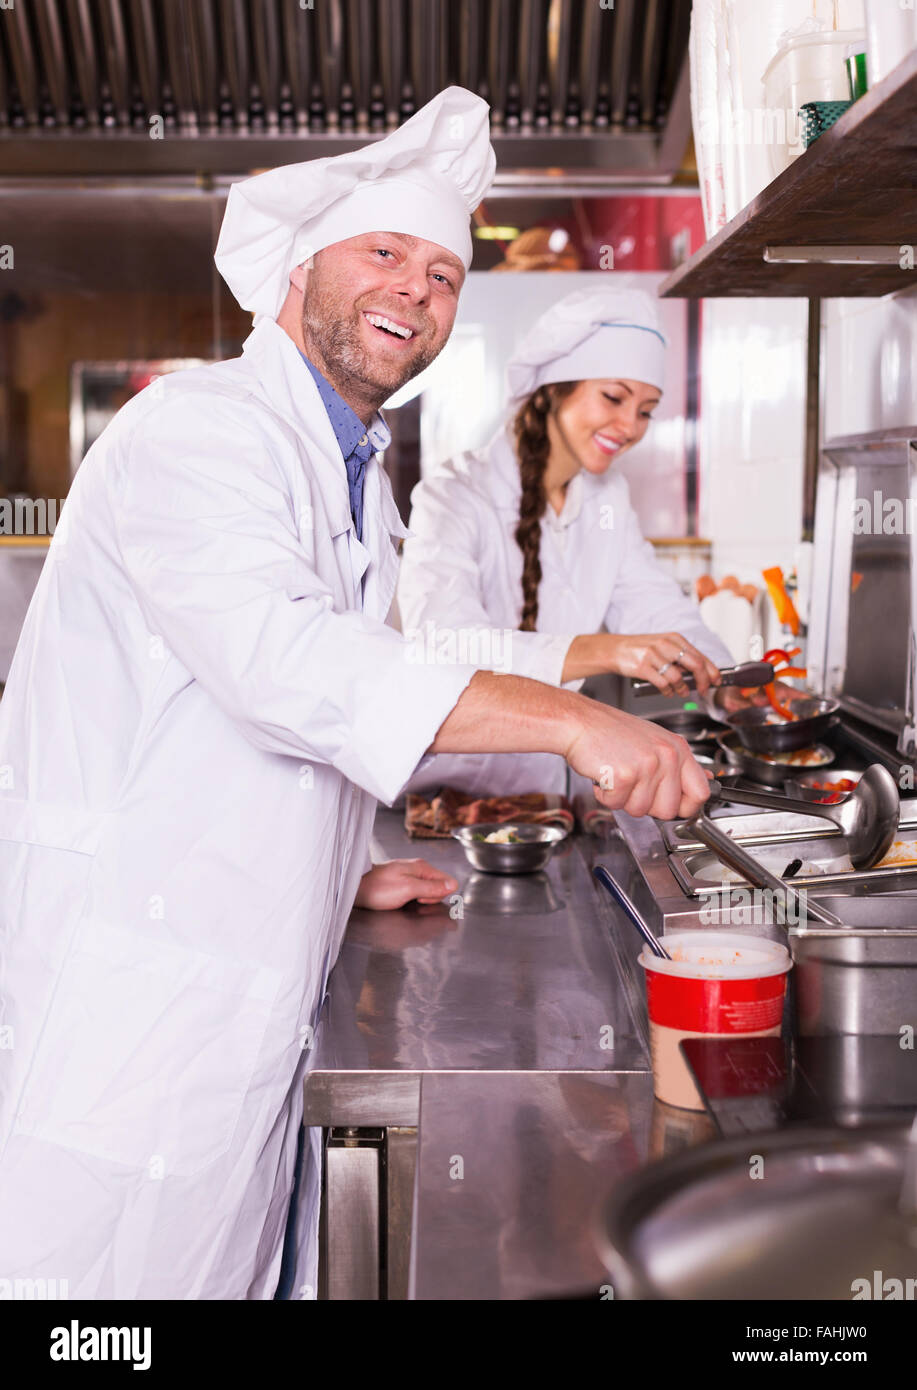 Cheerful happy cooks greeting customers at bistro kitchen and smiling Stock Photo